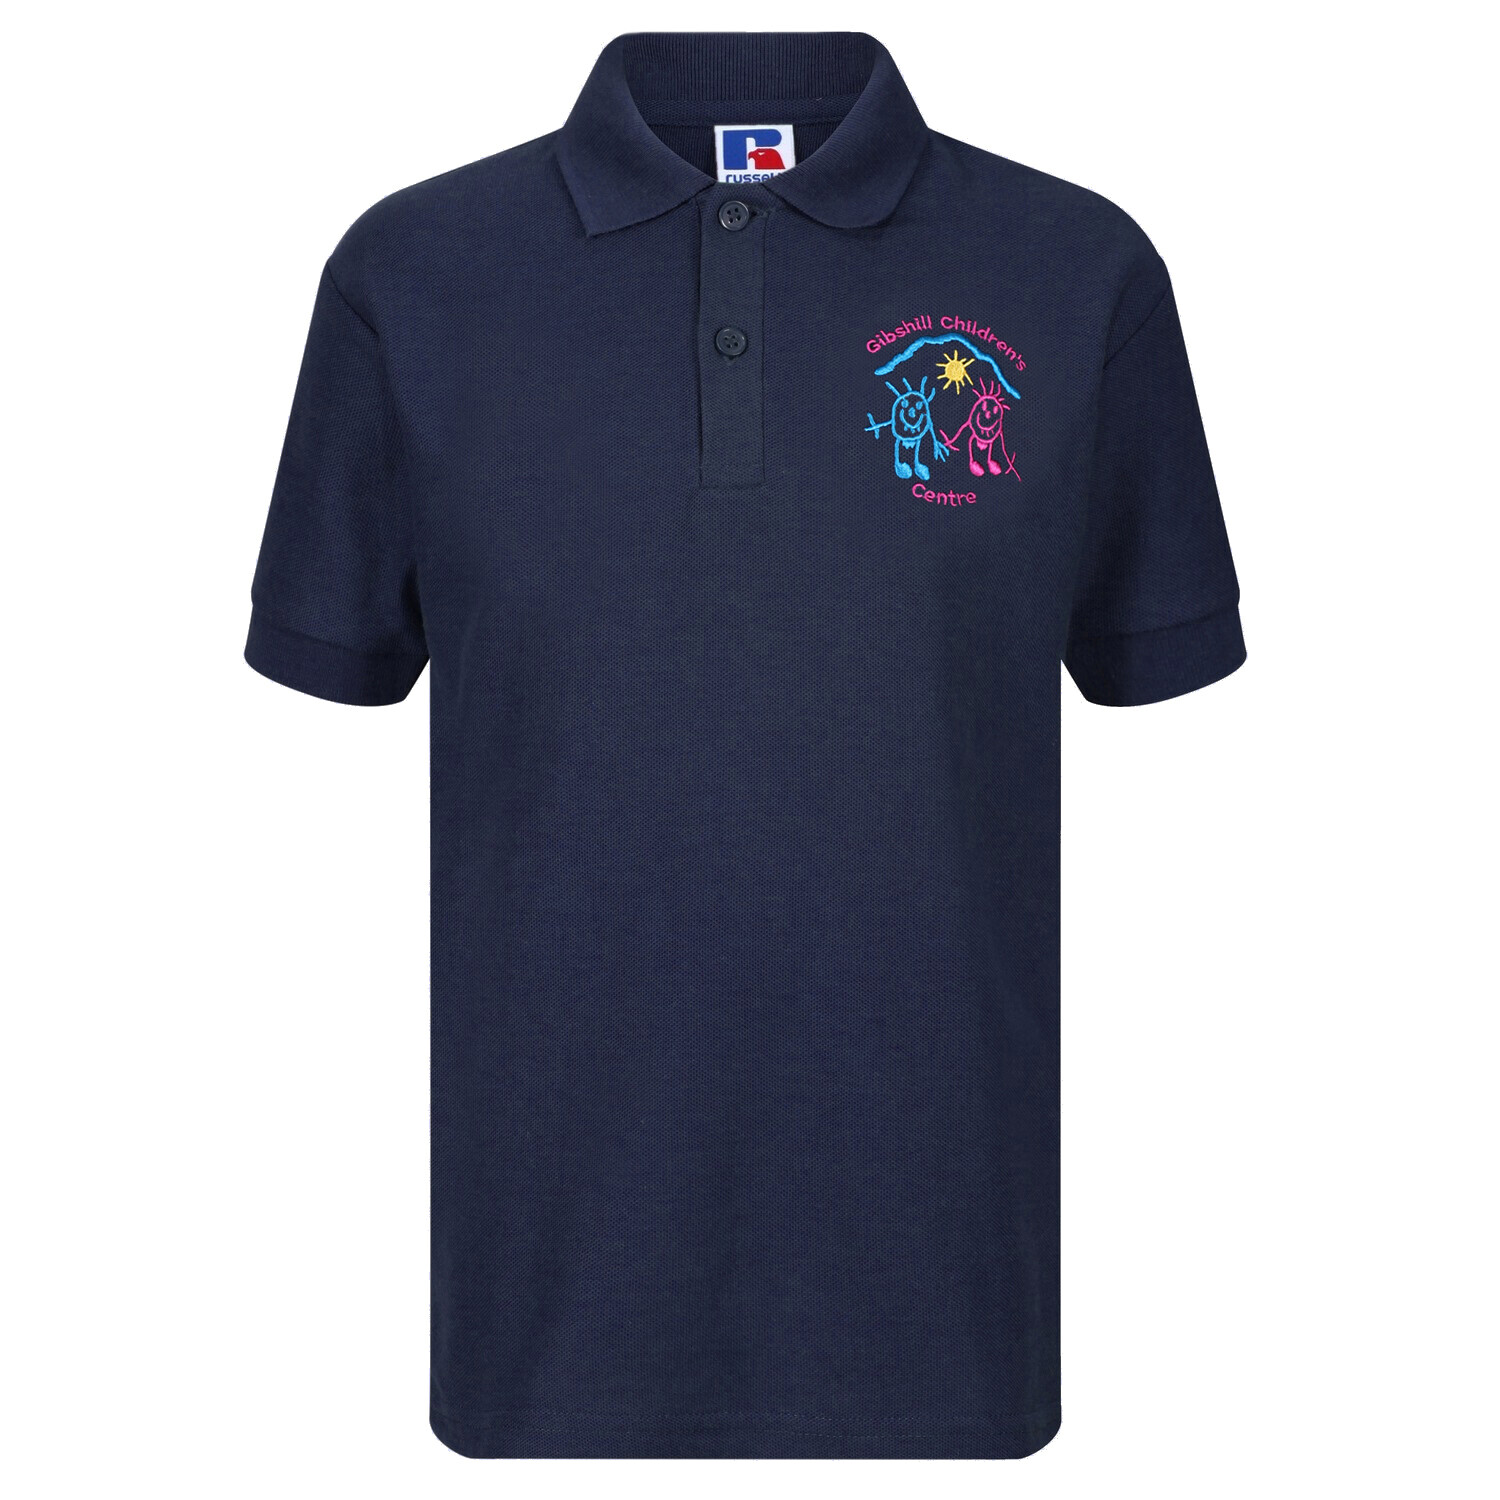 Gibshill Childrens Centre Staff Polo (Unisex) (RCS539M)